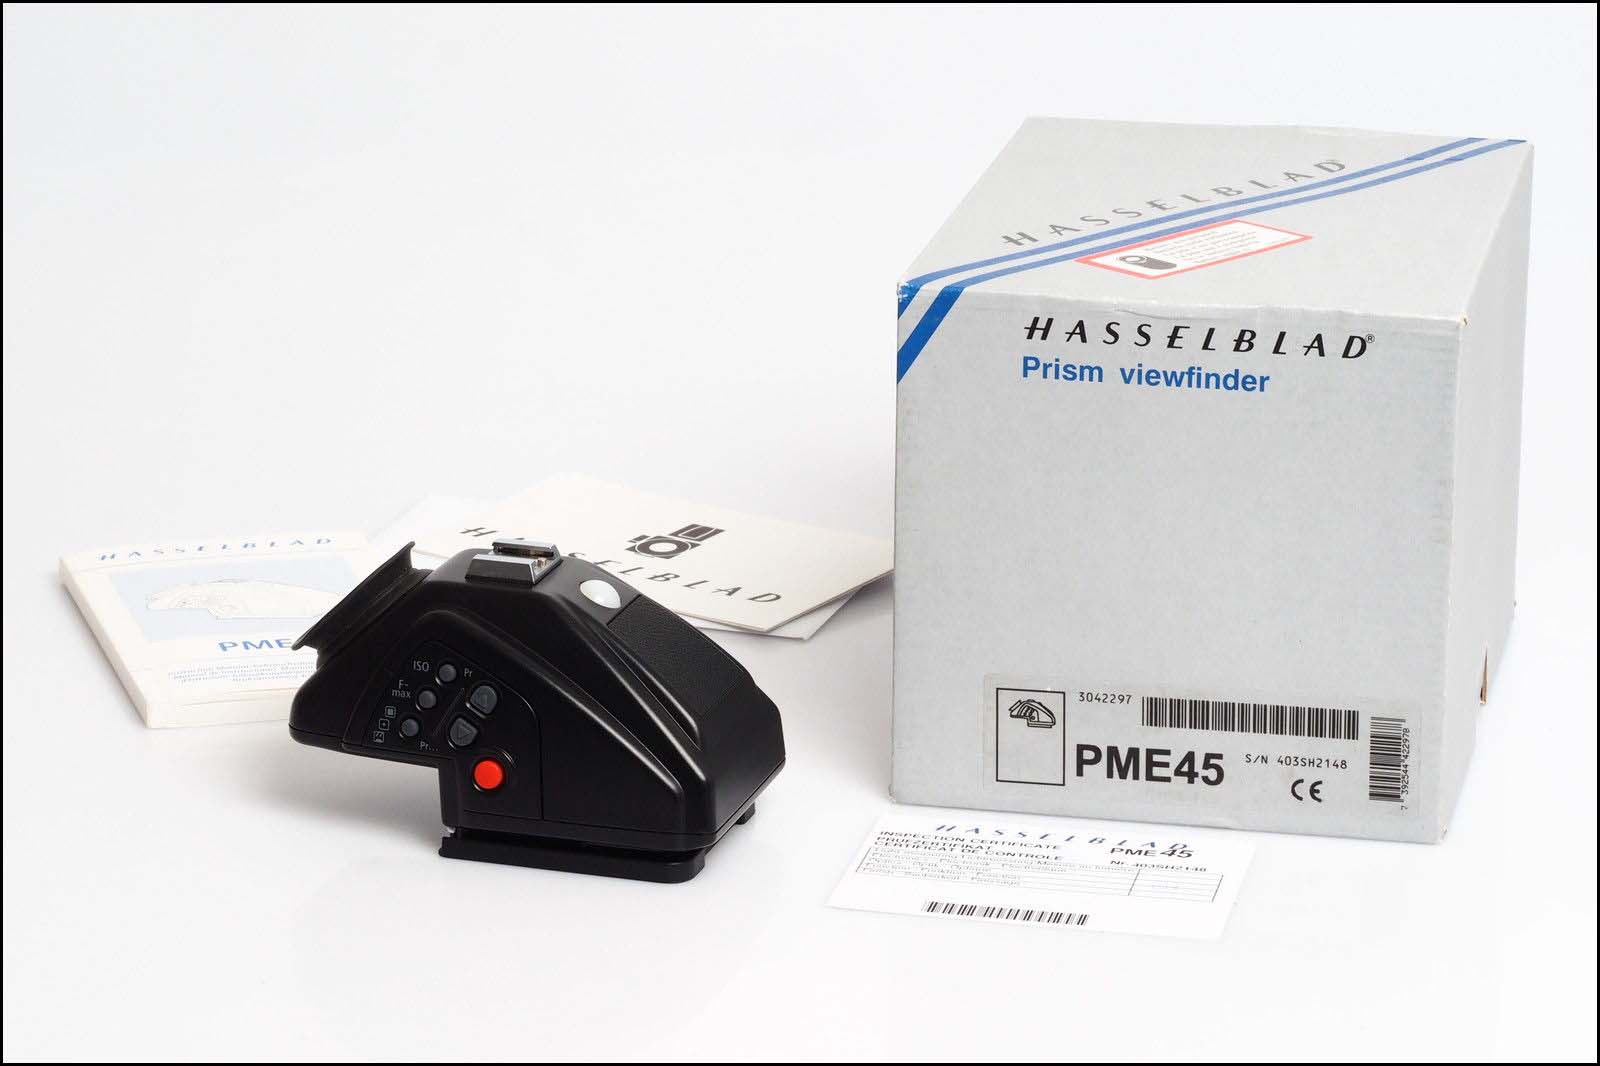  Hasselblad PME45 45 degree photometric viewfinder with packaging